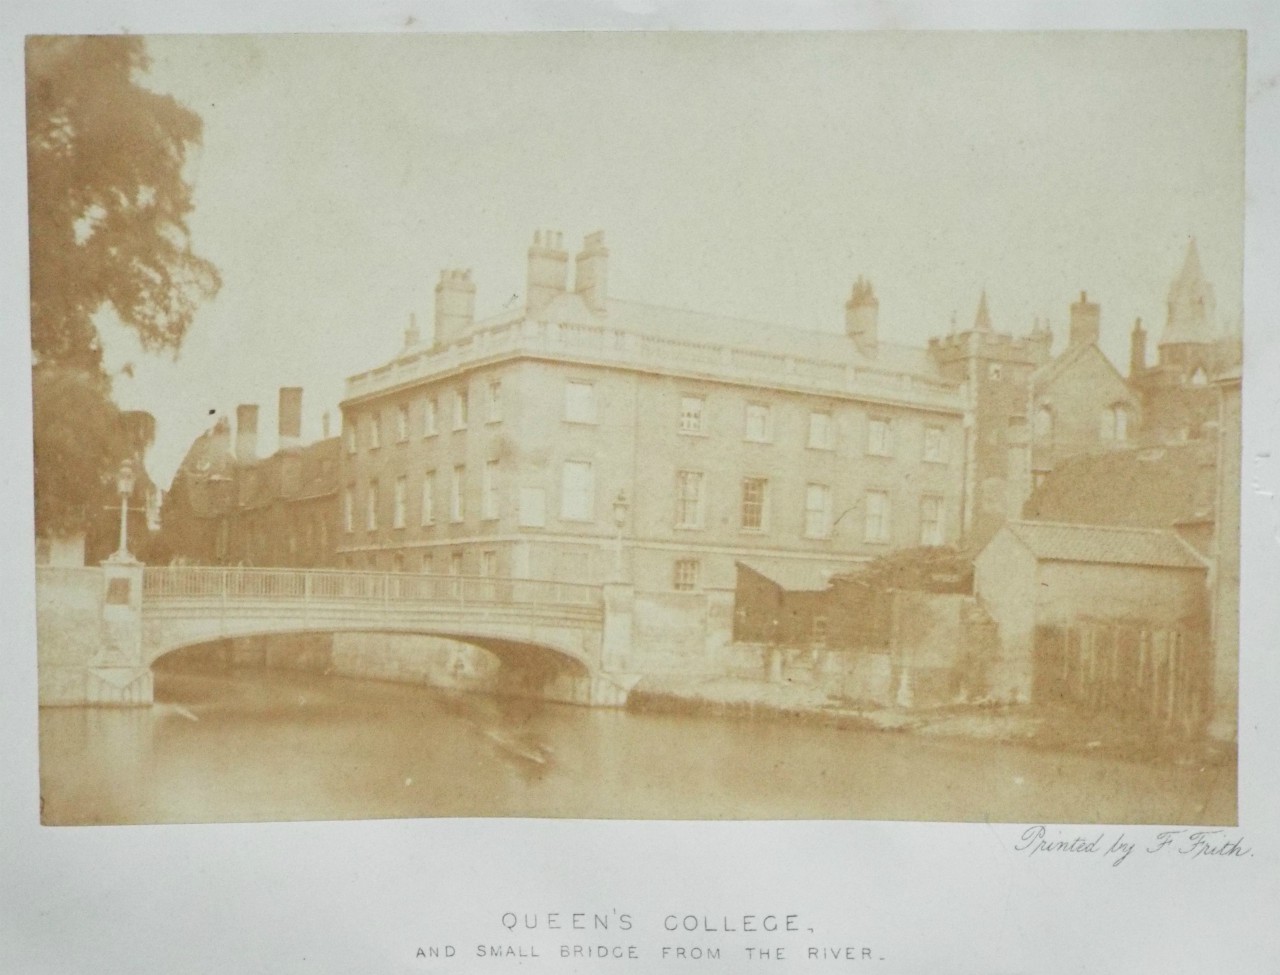 Photograph - Queen's College, and Small Bridge from the River.